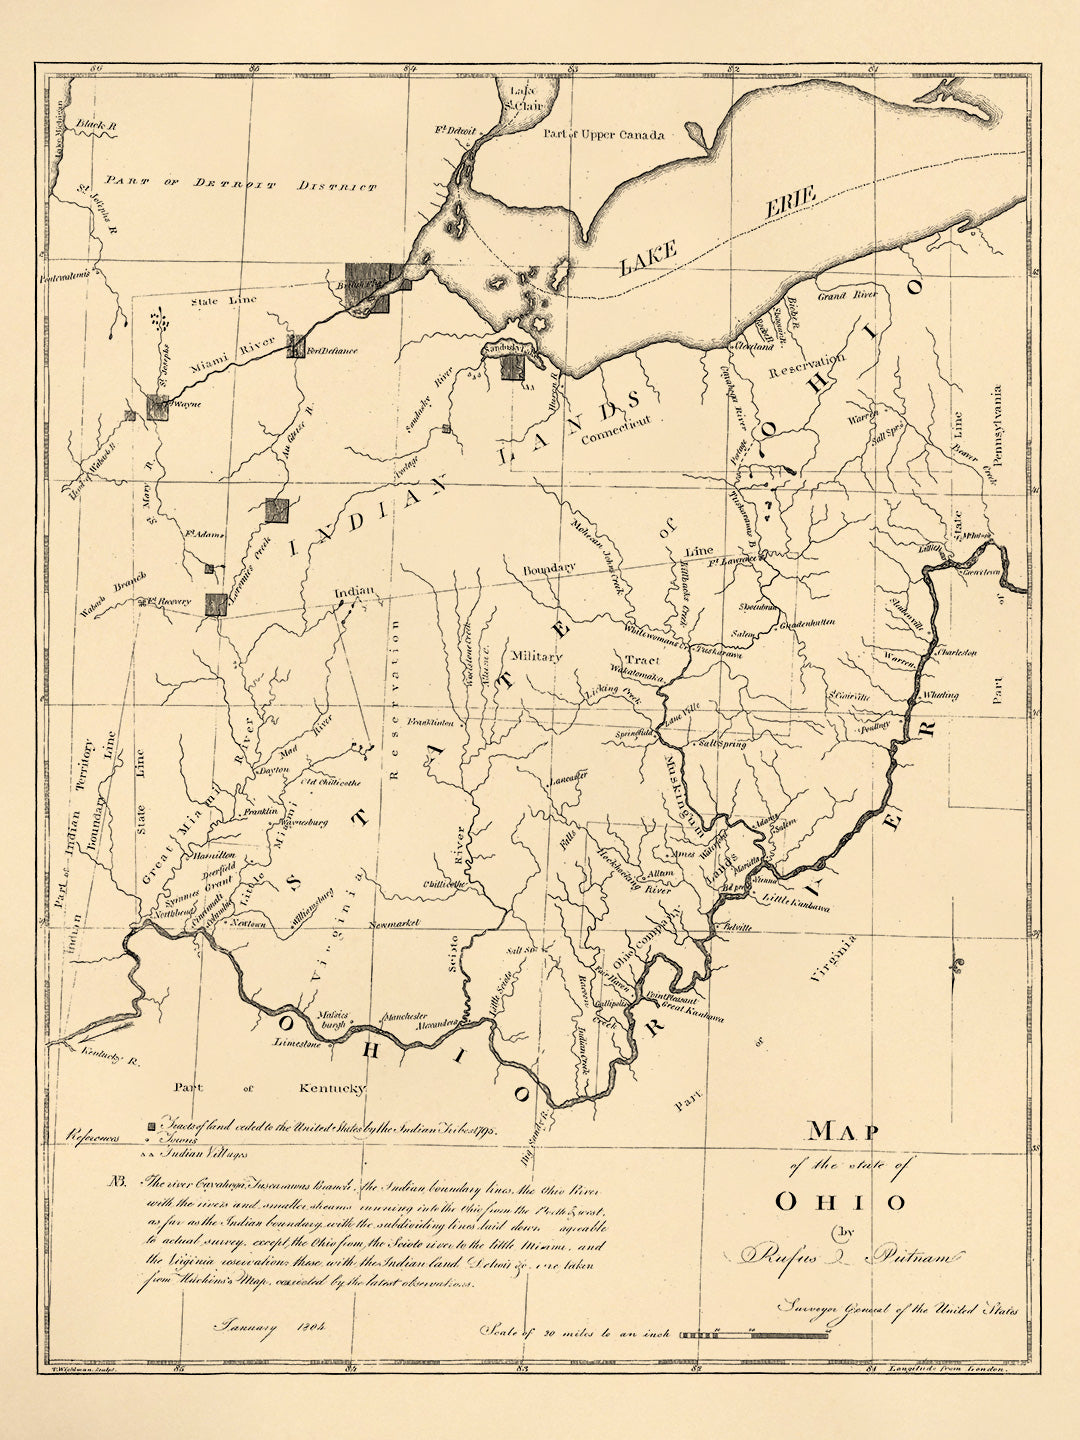 Map of the State of Ohio 1804